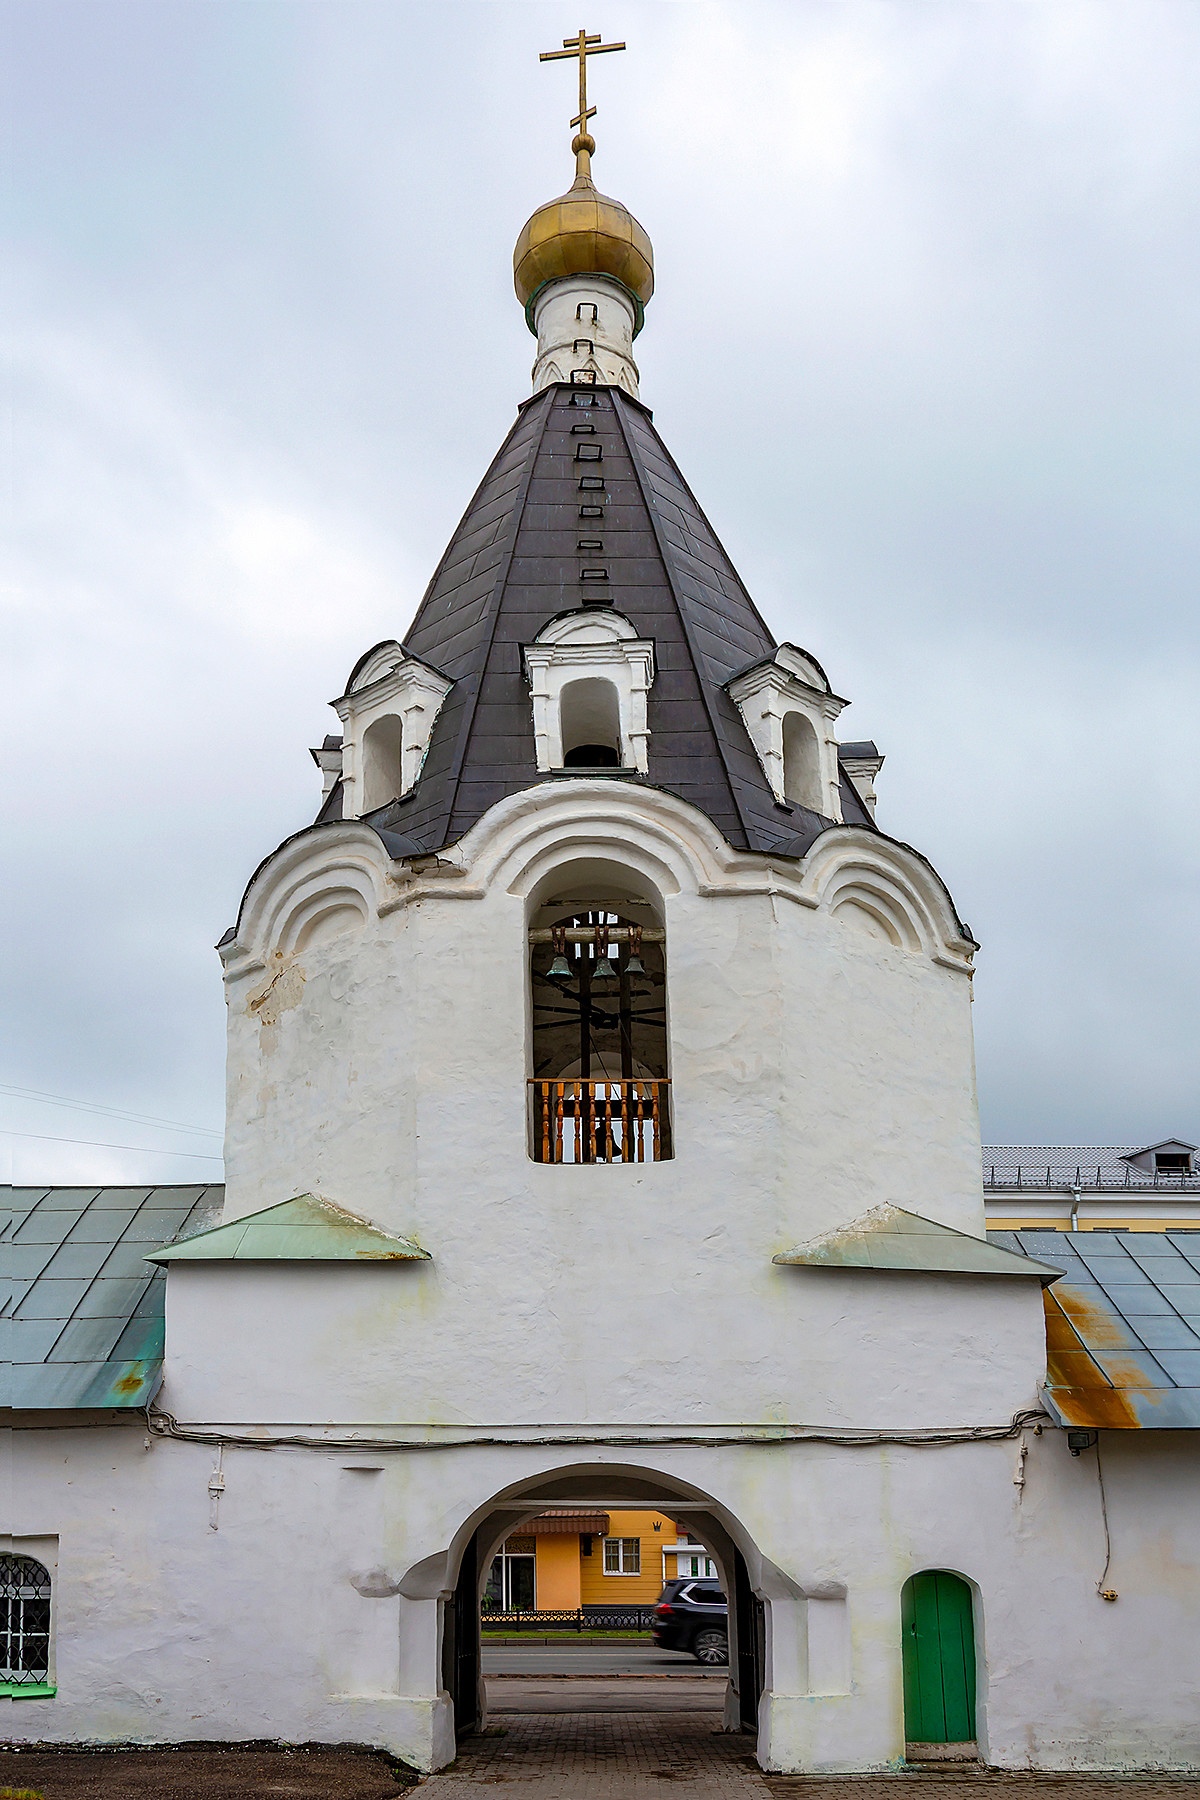 Church of the Archangel Michael with a bell tower